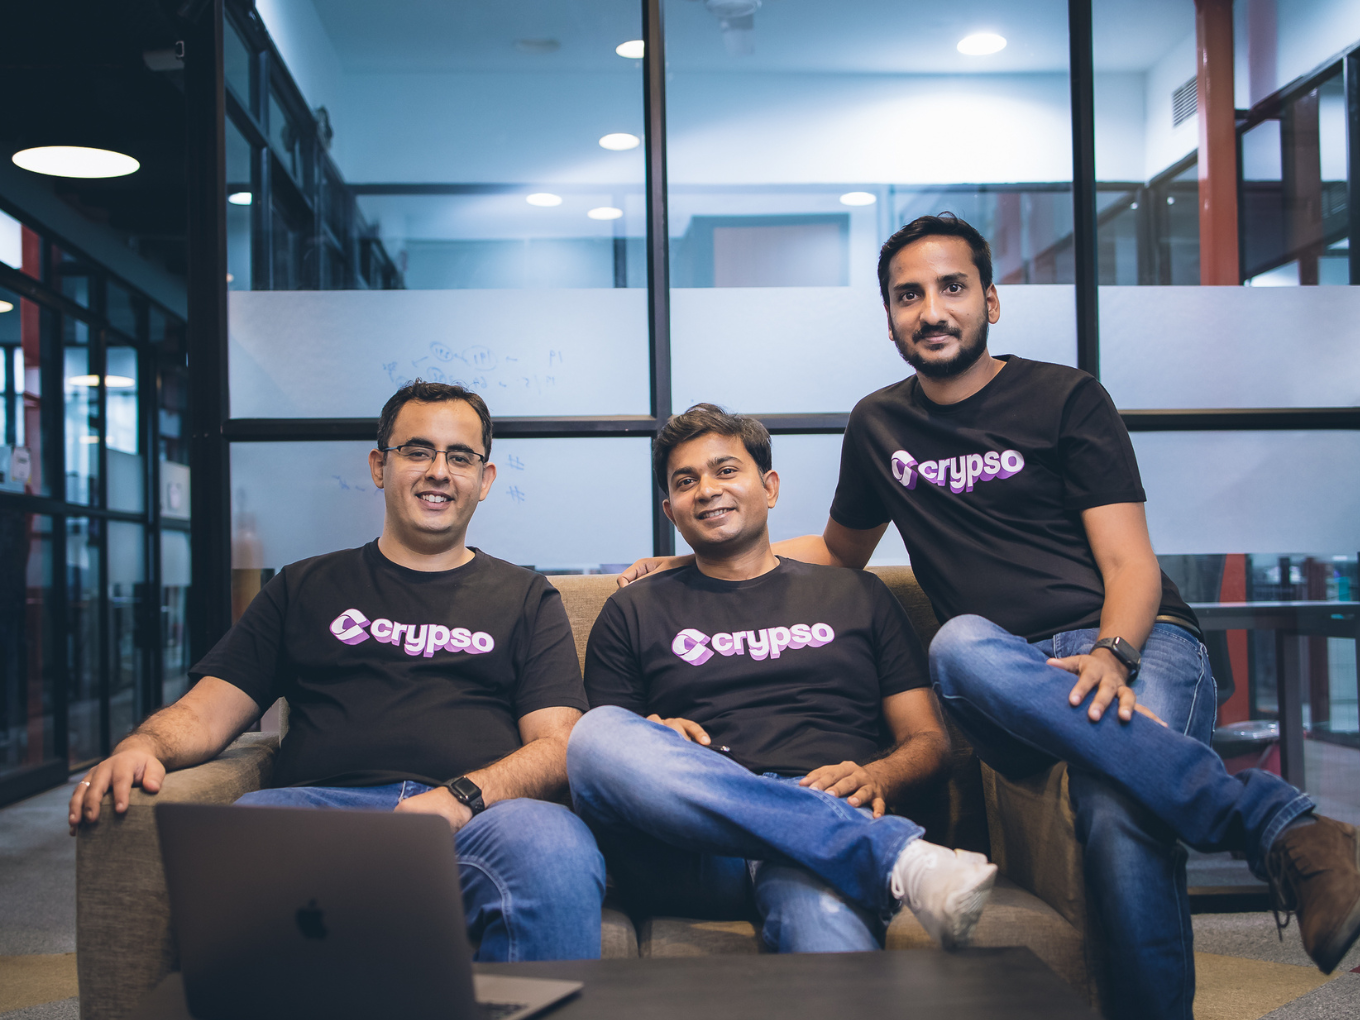 You are currently viewing Crypto Startup Crypso Raises Funding To Widen Product Offerings